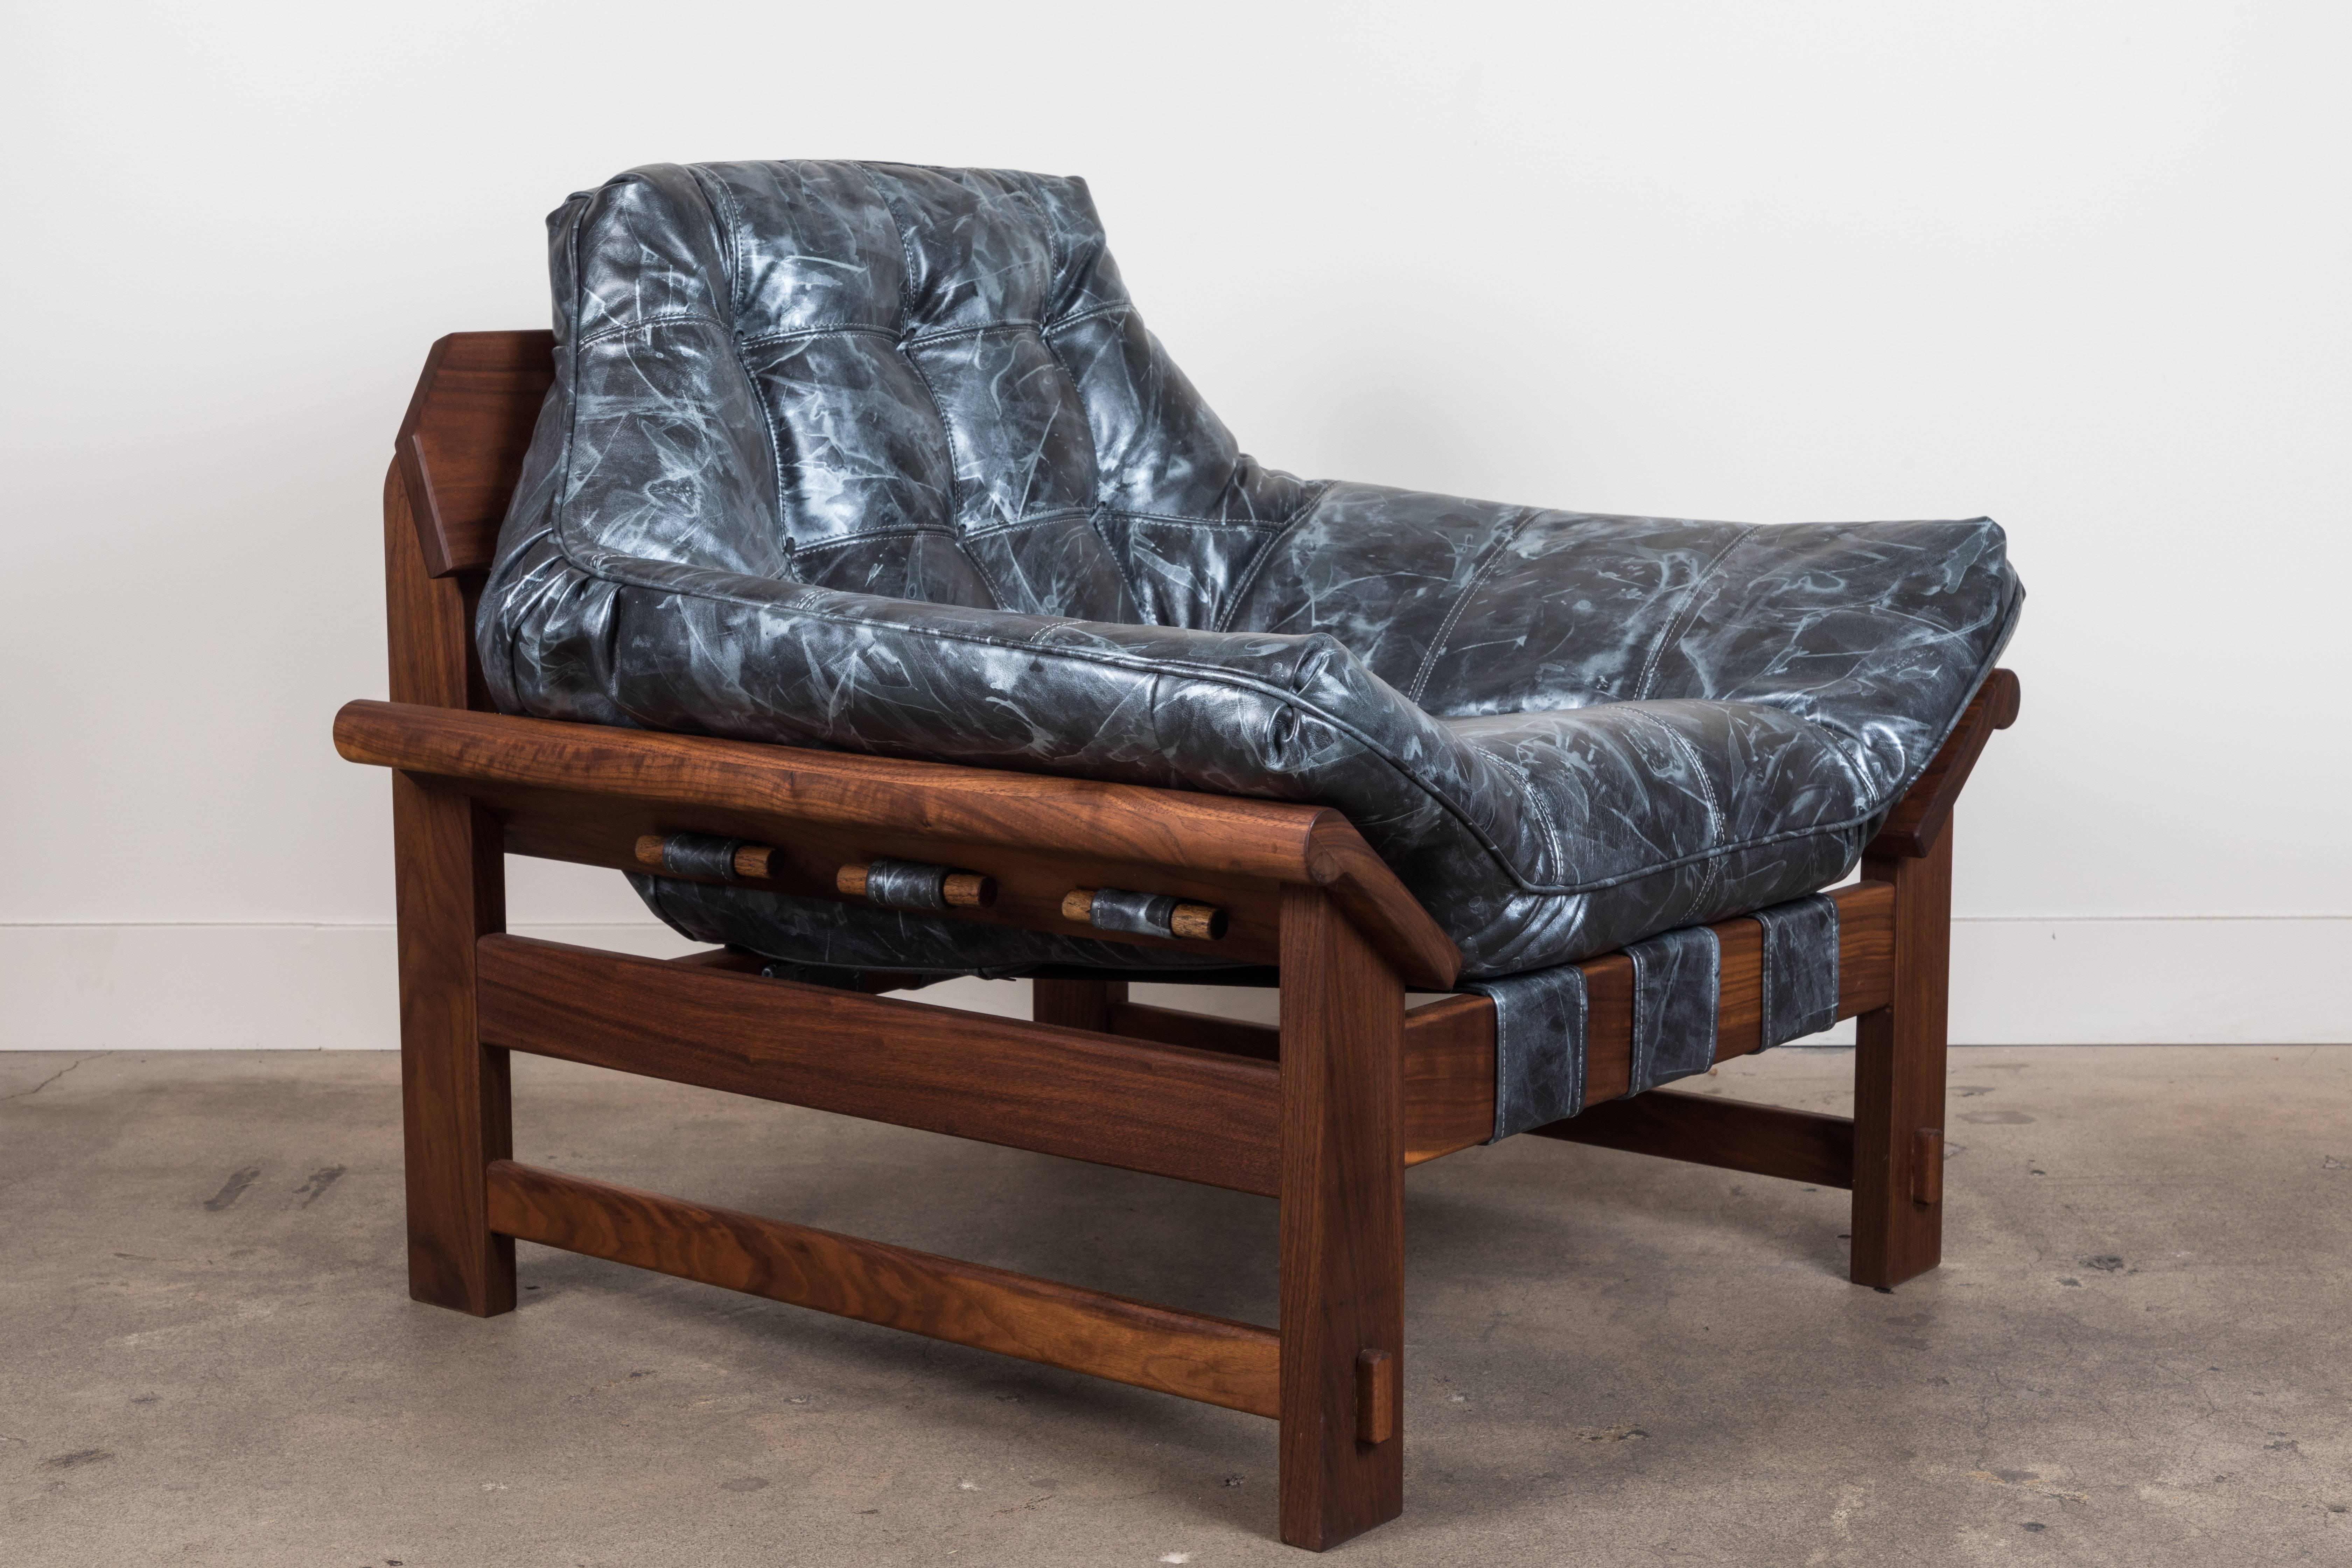 Ojai lounge chair by Lawson-Fenning upholstered in hand-painted leather by AVO. The Ojai Lounge Chair features a solid White Oak or solid Walnut base and a single tufted leather cushion with leather straps.


As shown: $3,250
To order: $2,650 + COL.